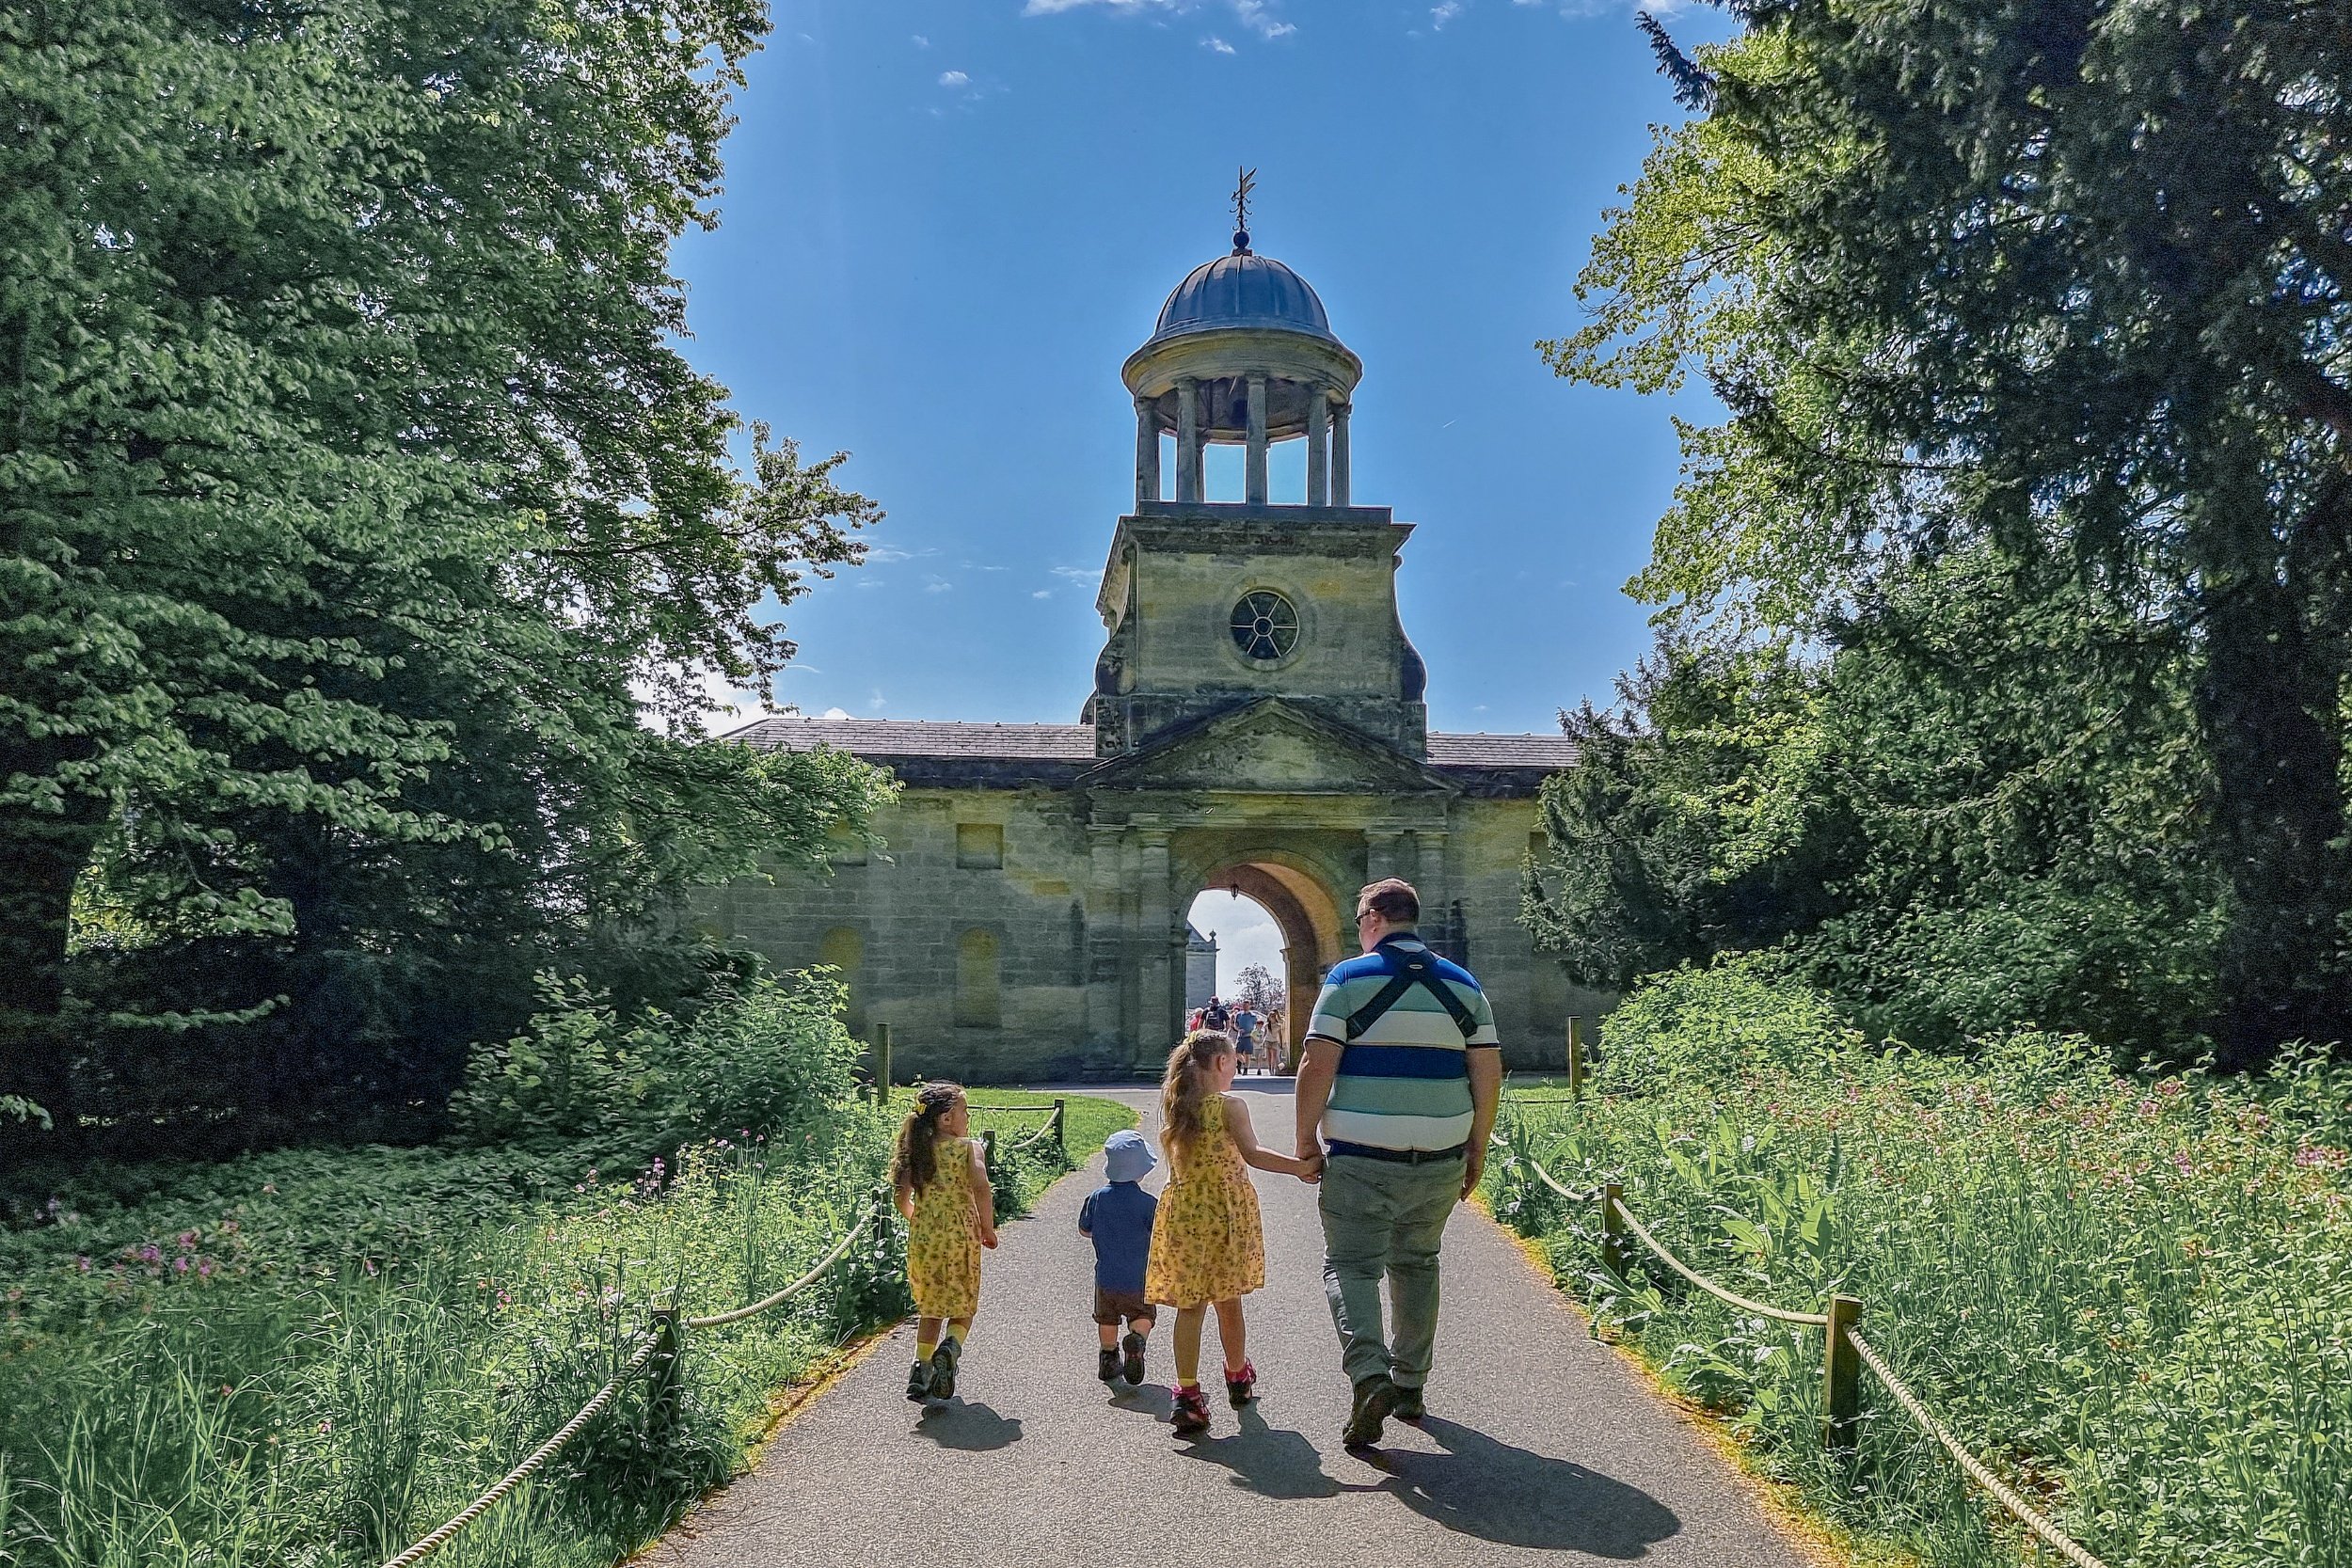 John is baby wearing, while holding Squidgy's hand and walking alongside Pickle and Munchkin. they are on a path with the Wallington clocktower ahead of them.